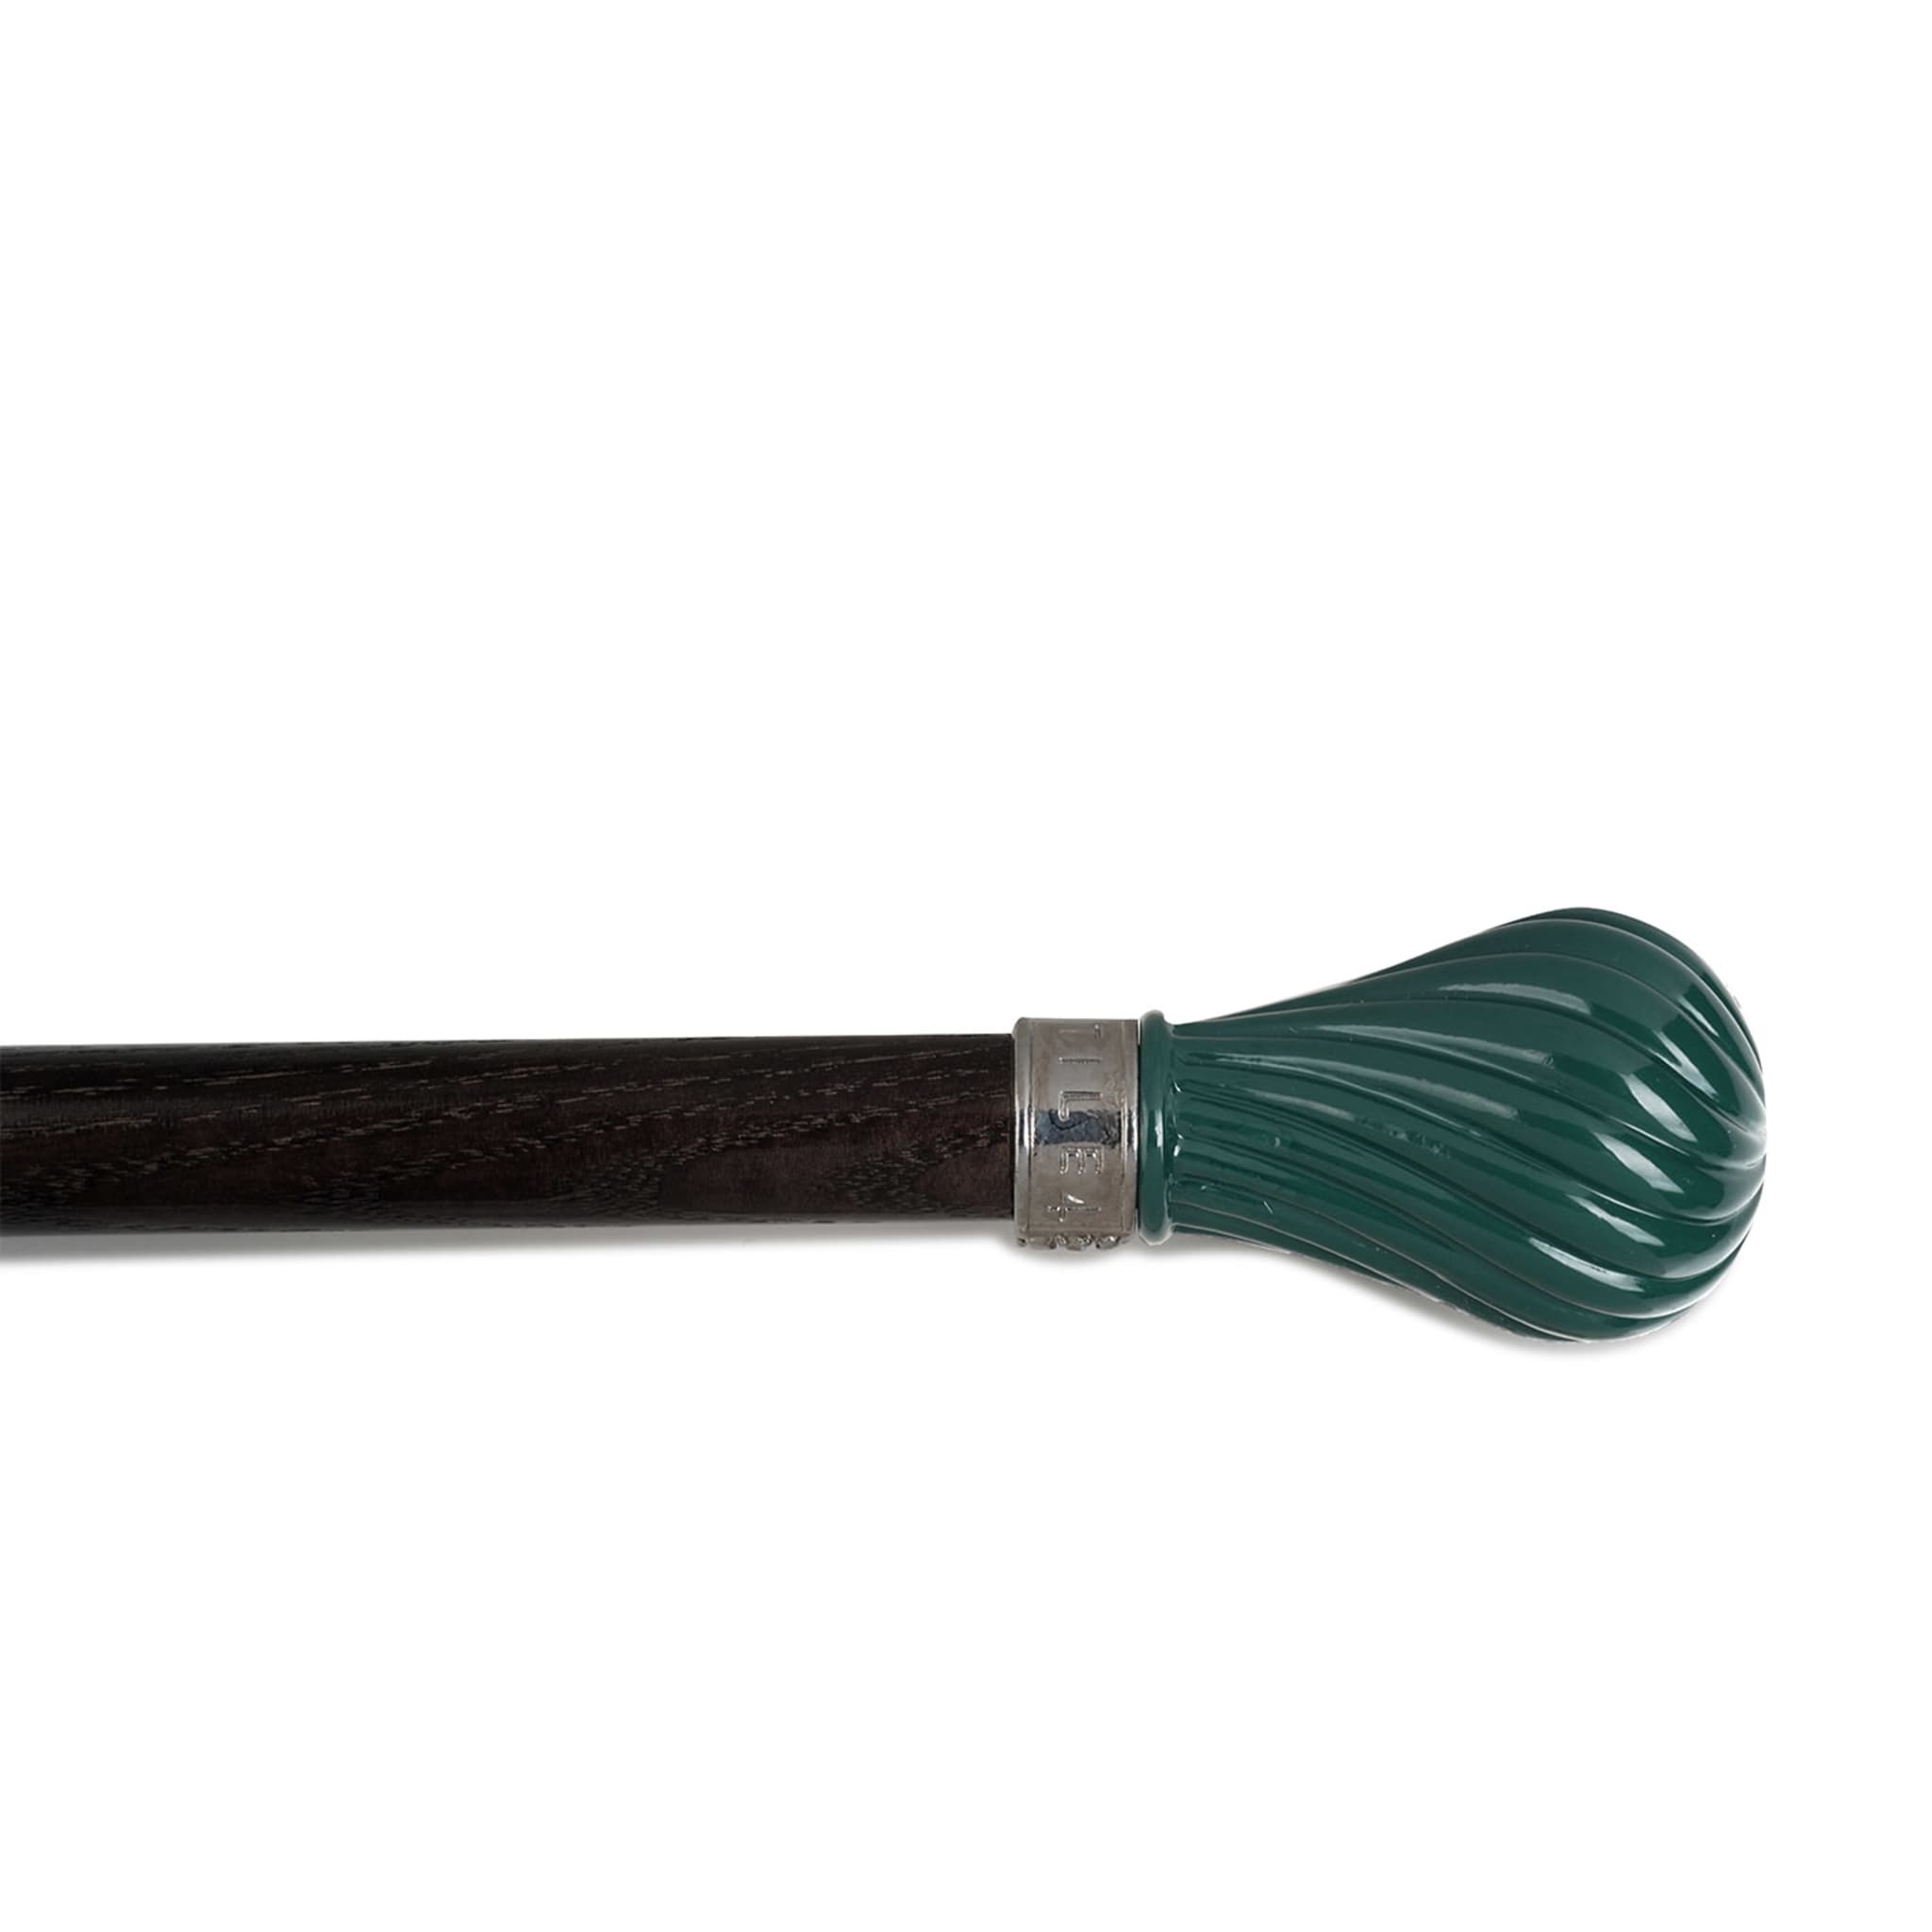 Sagola Dark Shoe Horn with Twisted Petrol-Blue Handle - Alternative view 1